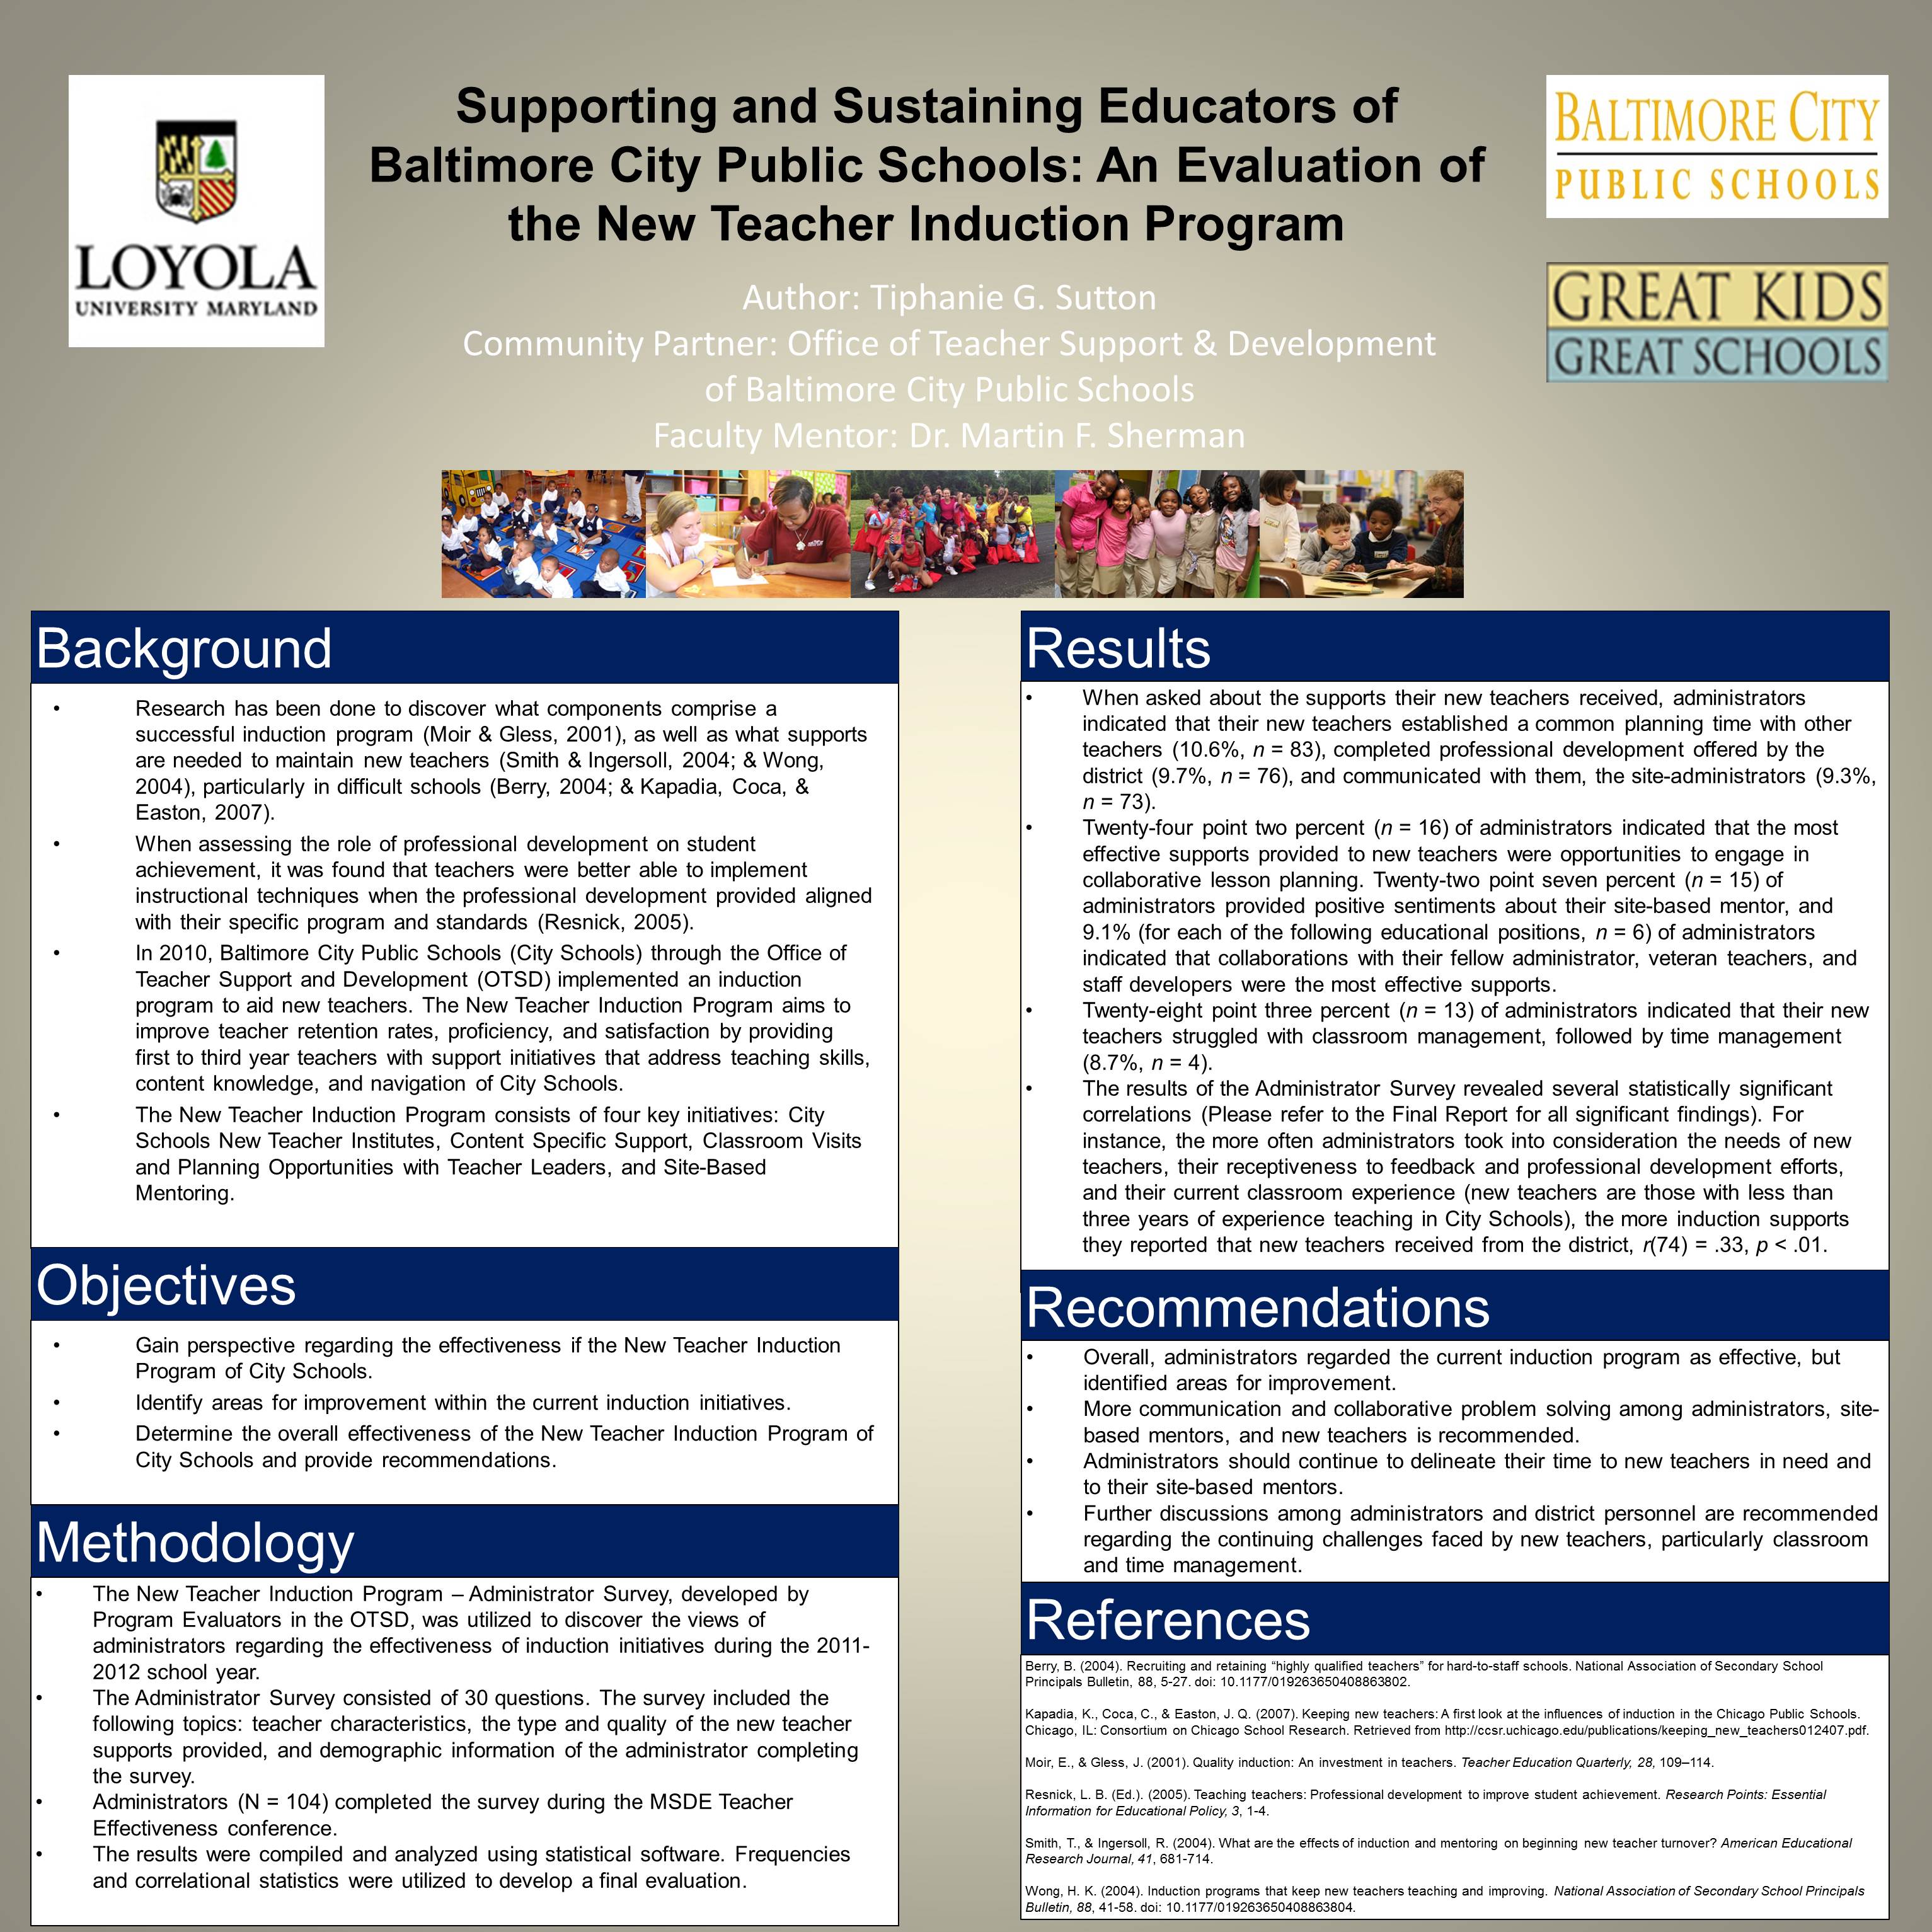 Enlarged poster image: Supporting and Sustaining Educators in Baltimore City Public Schools: An Evaluation of the New Teacher Induction Program